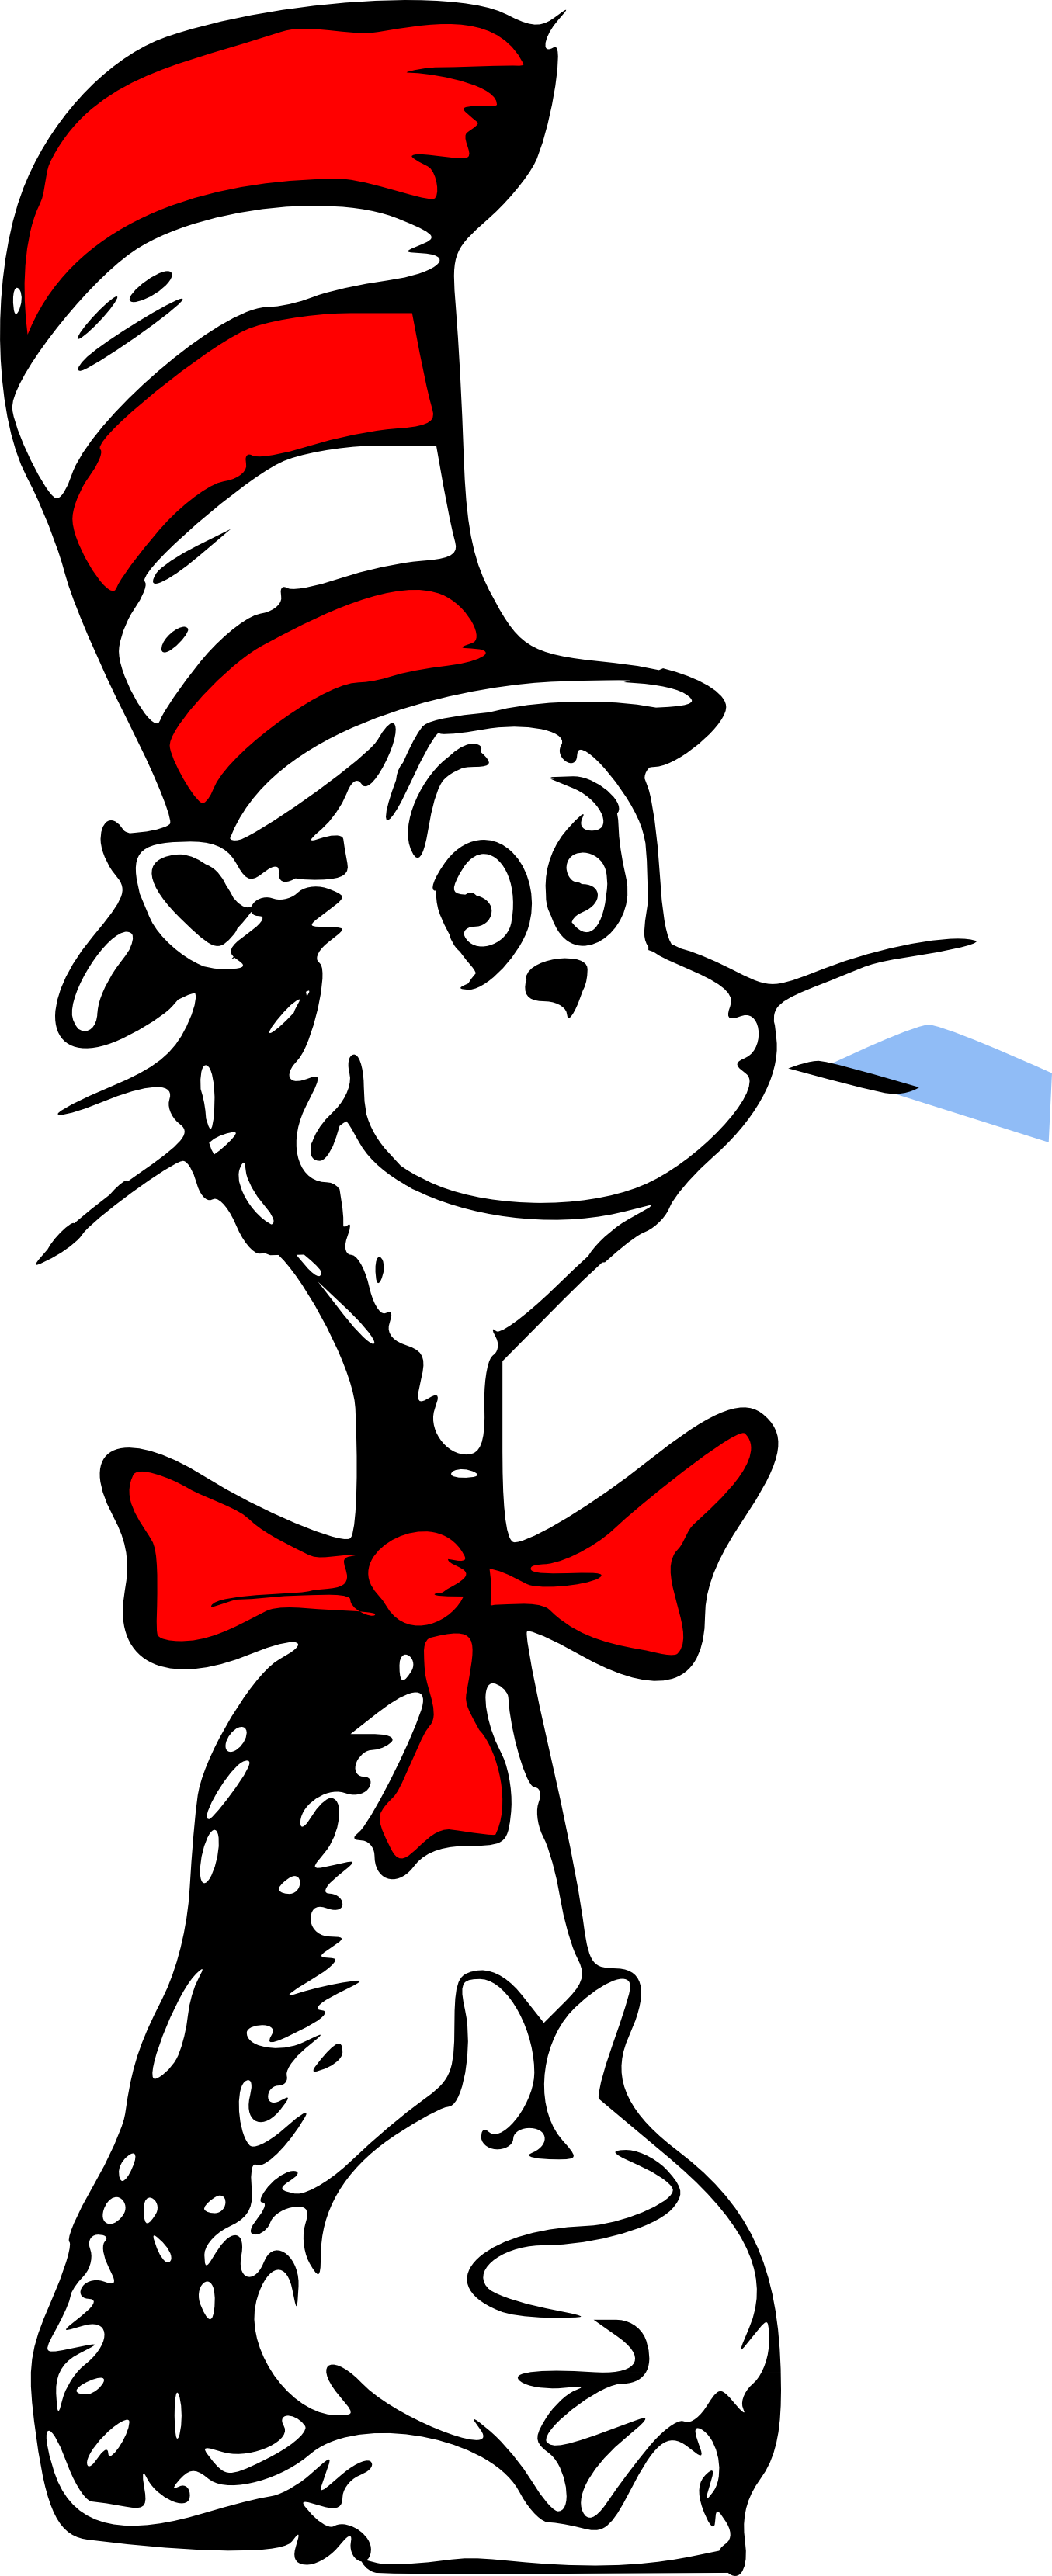 Dr seuss characters group. Words clipart doctor